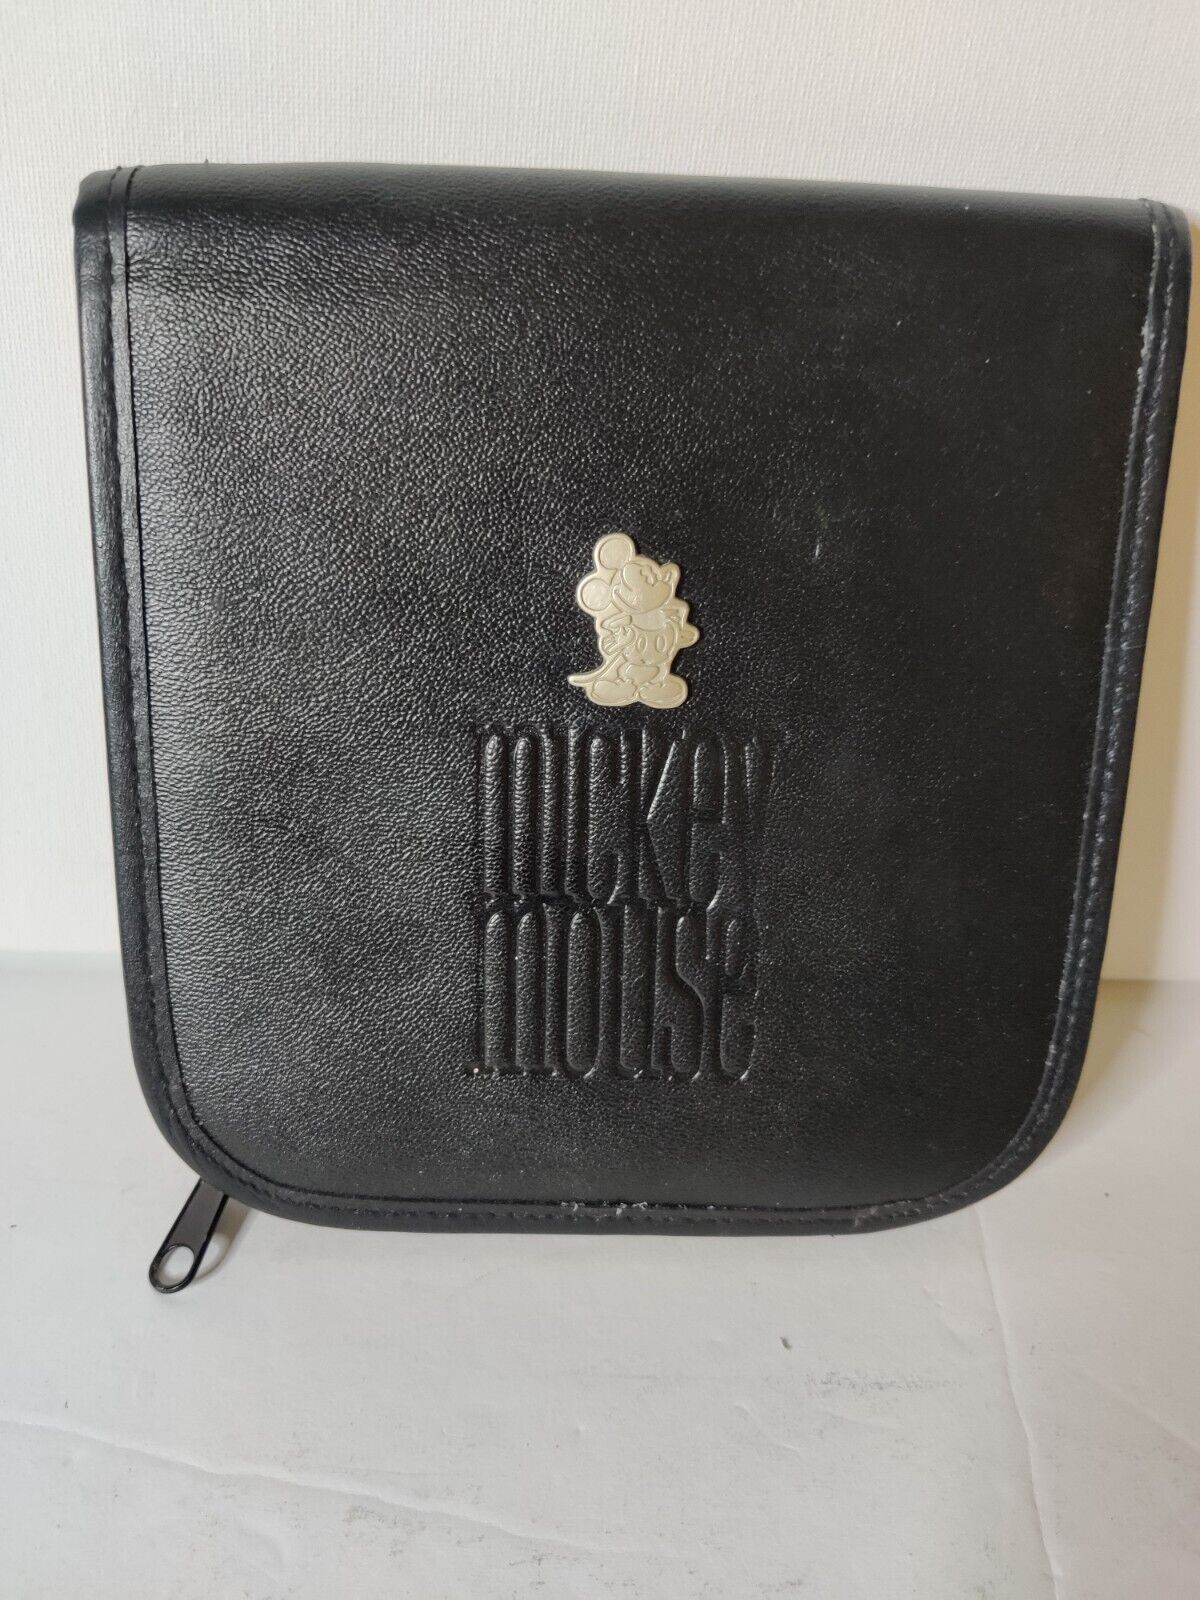 Disney Store Mickey Mouse Leather CD Case Zipper 6 Sleeves Holds 12